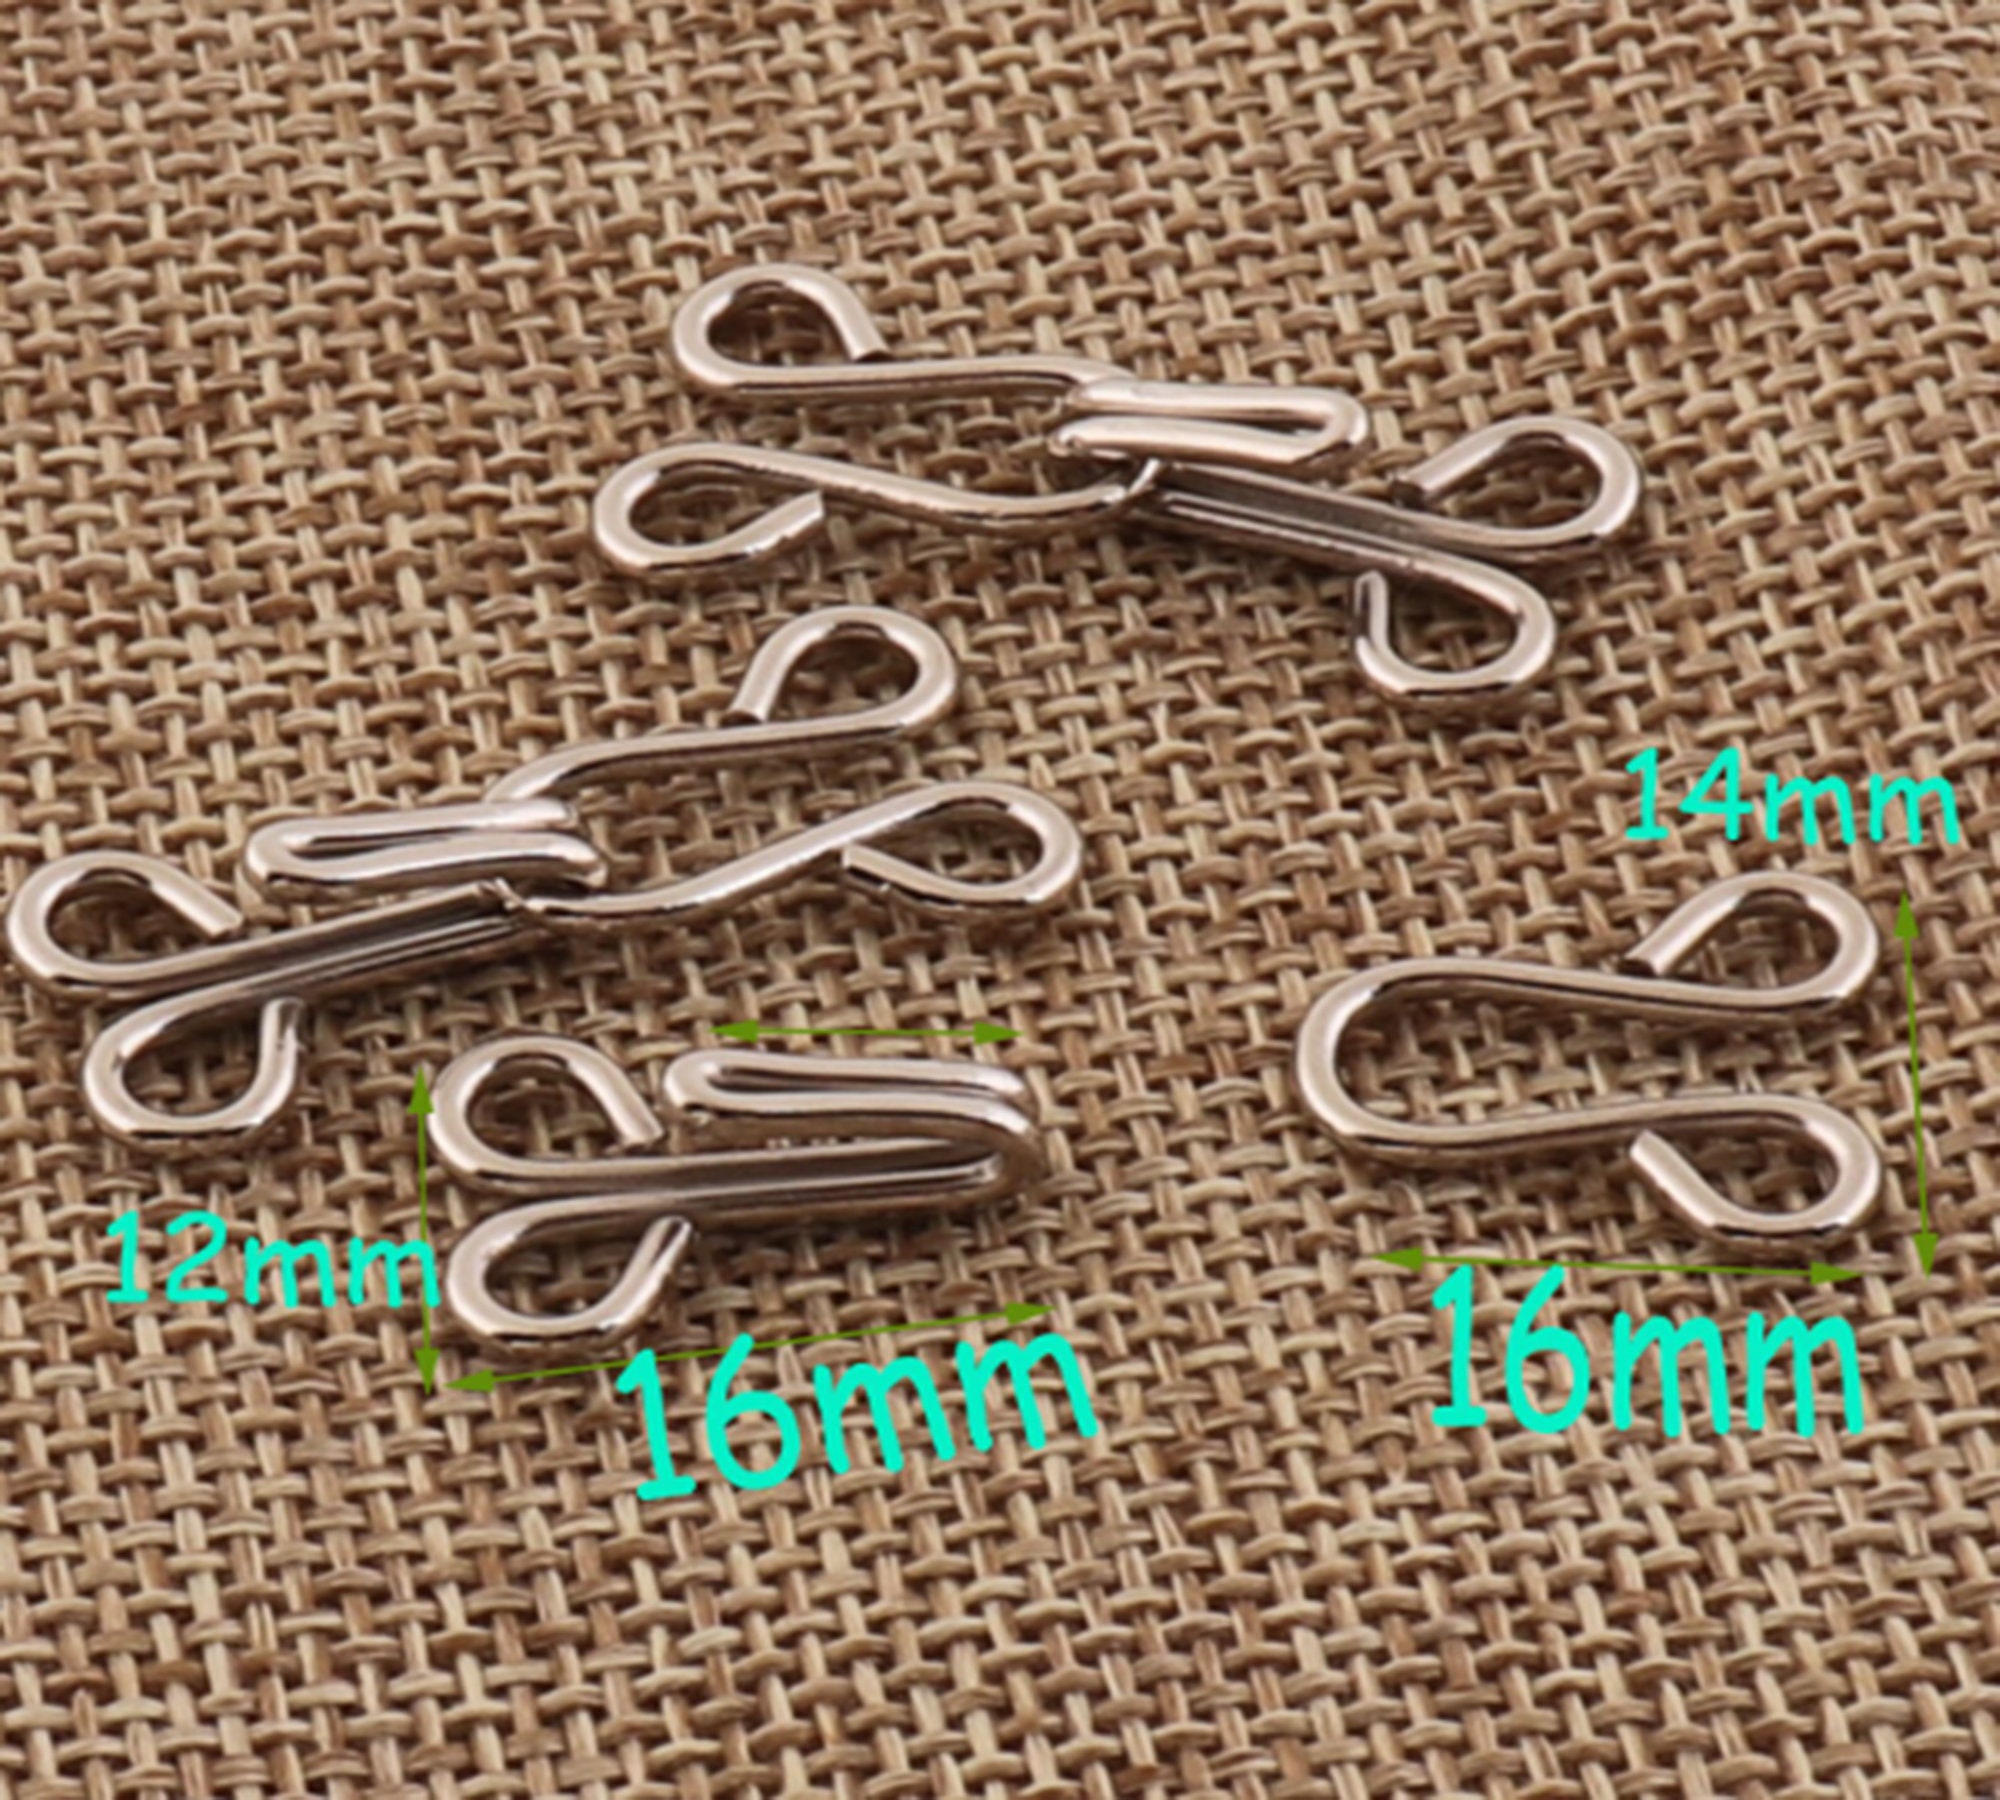  100 Pieces Sewing Hook and Eye for Clothing Fasteners